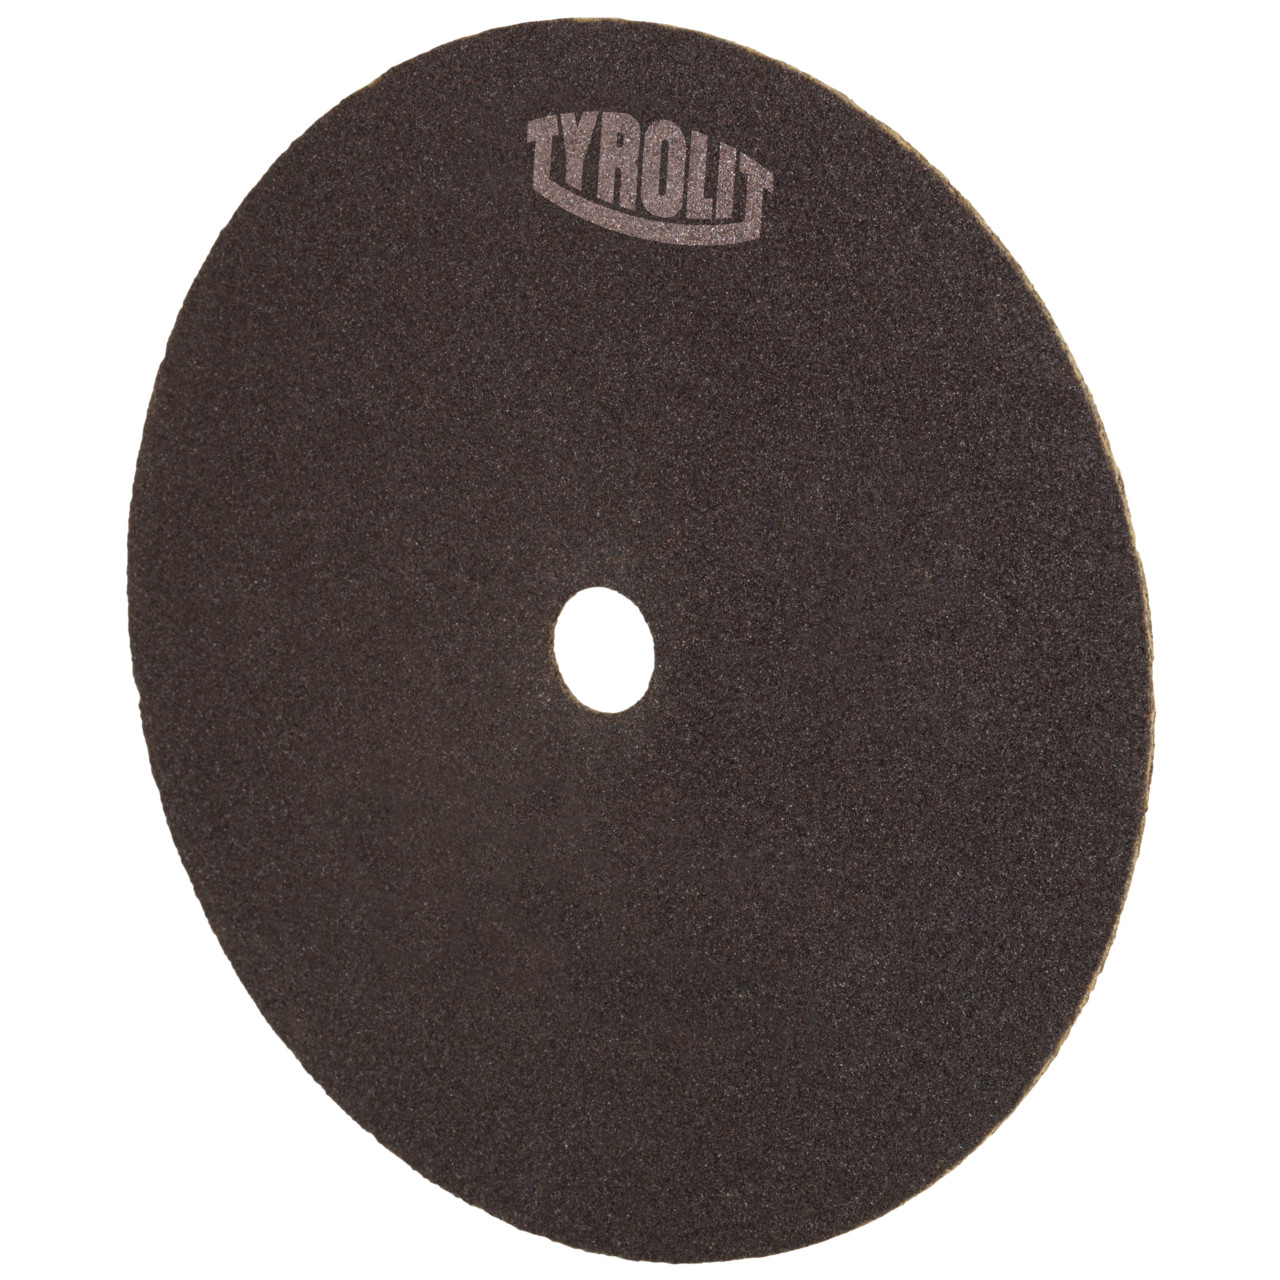 Tyrolit Cutting disc for cutting and saw sharpening DxDxH 200x1.5x20 For steel and HSS, shape: 41N - straight version (non-woven cutting disc), Art. 1254